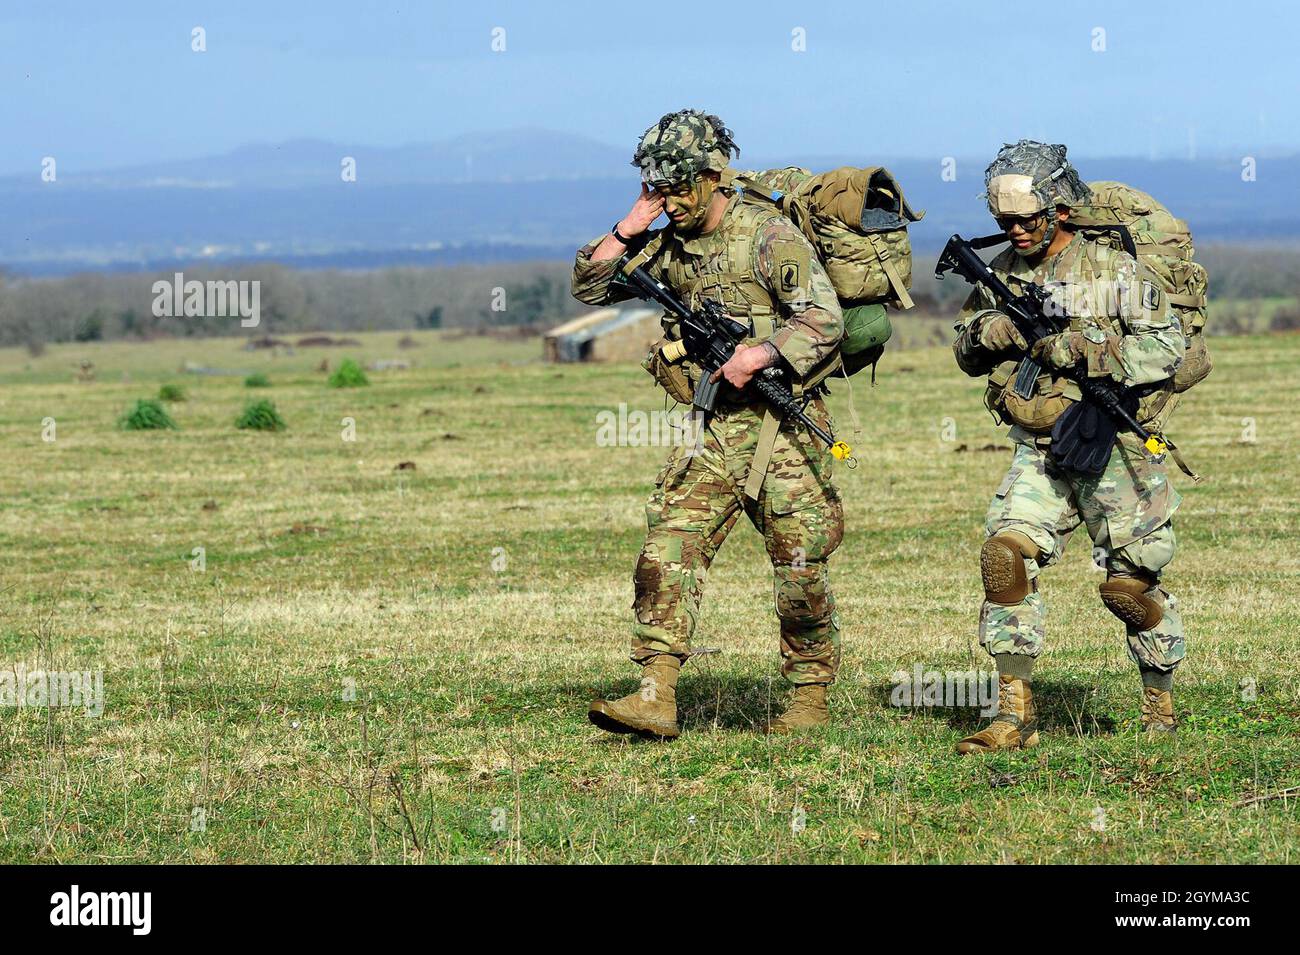 U.S. Army paratroopers from HHC, 2nd Battalion, 503rd Infantry Regiment, 173rd Airborne Brigade, move towards the objective during Exercise Rock Topside 20, in Monte Romano, Italy, Jan. 29, 2020. Rock Topside is a joint forced entry exercise to train the battalion’s ability to conduct airborne contingency response force operations. This training stresses the interoperability of both the paratroopers of the 2nd Battalion, 503rd Infantry Regiment and Italian paratroopers of Reggimento Savoia Cavalleria 3.(U.S Army photo by Elena Baladelli) Stock Photo